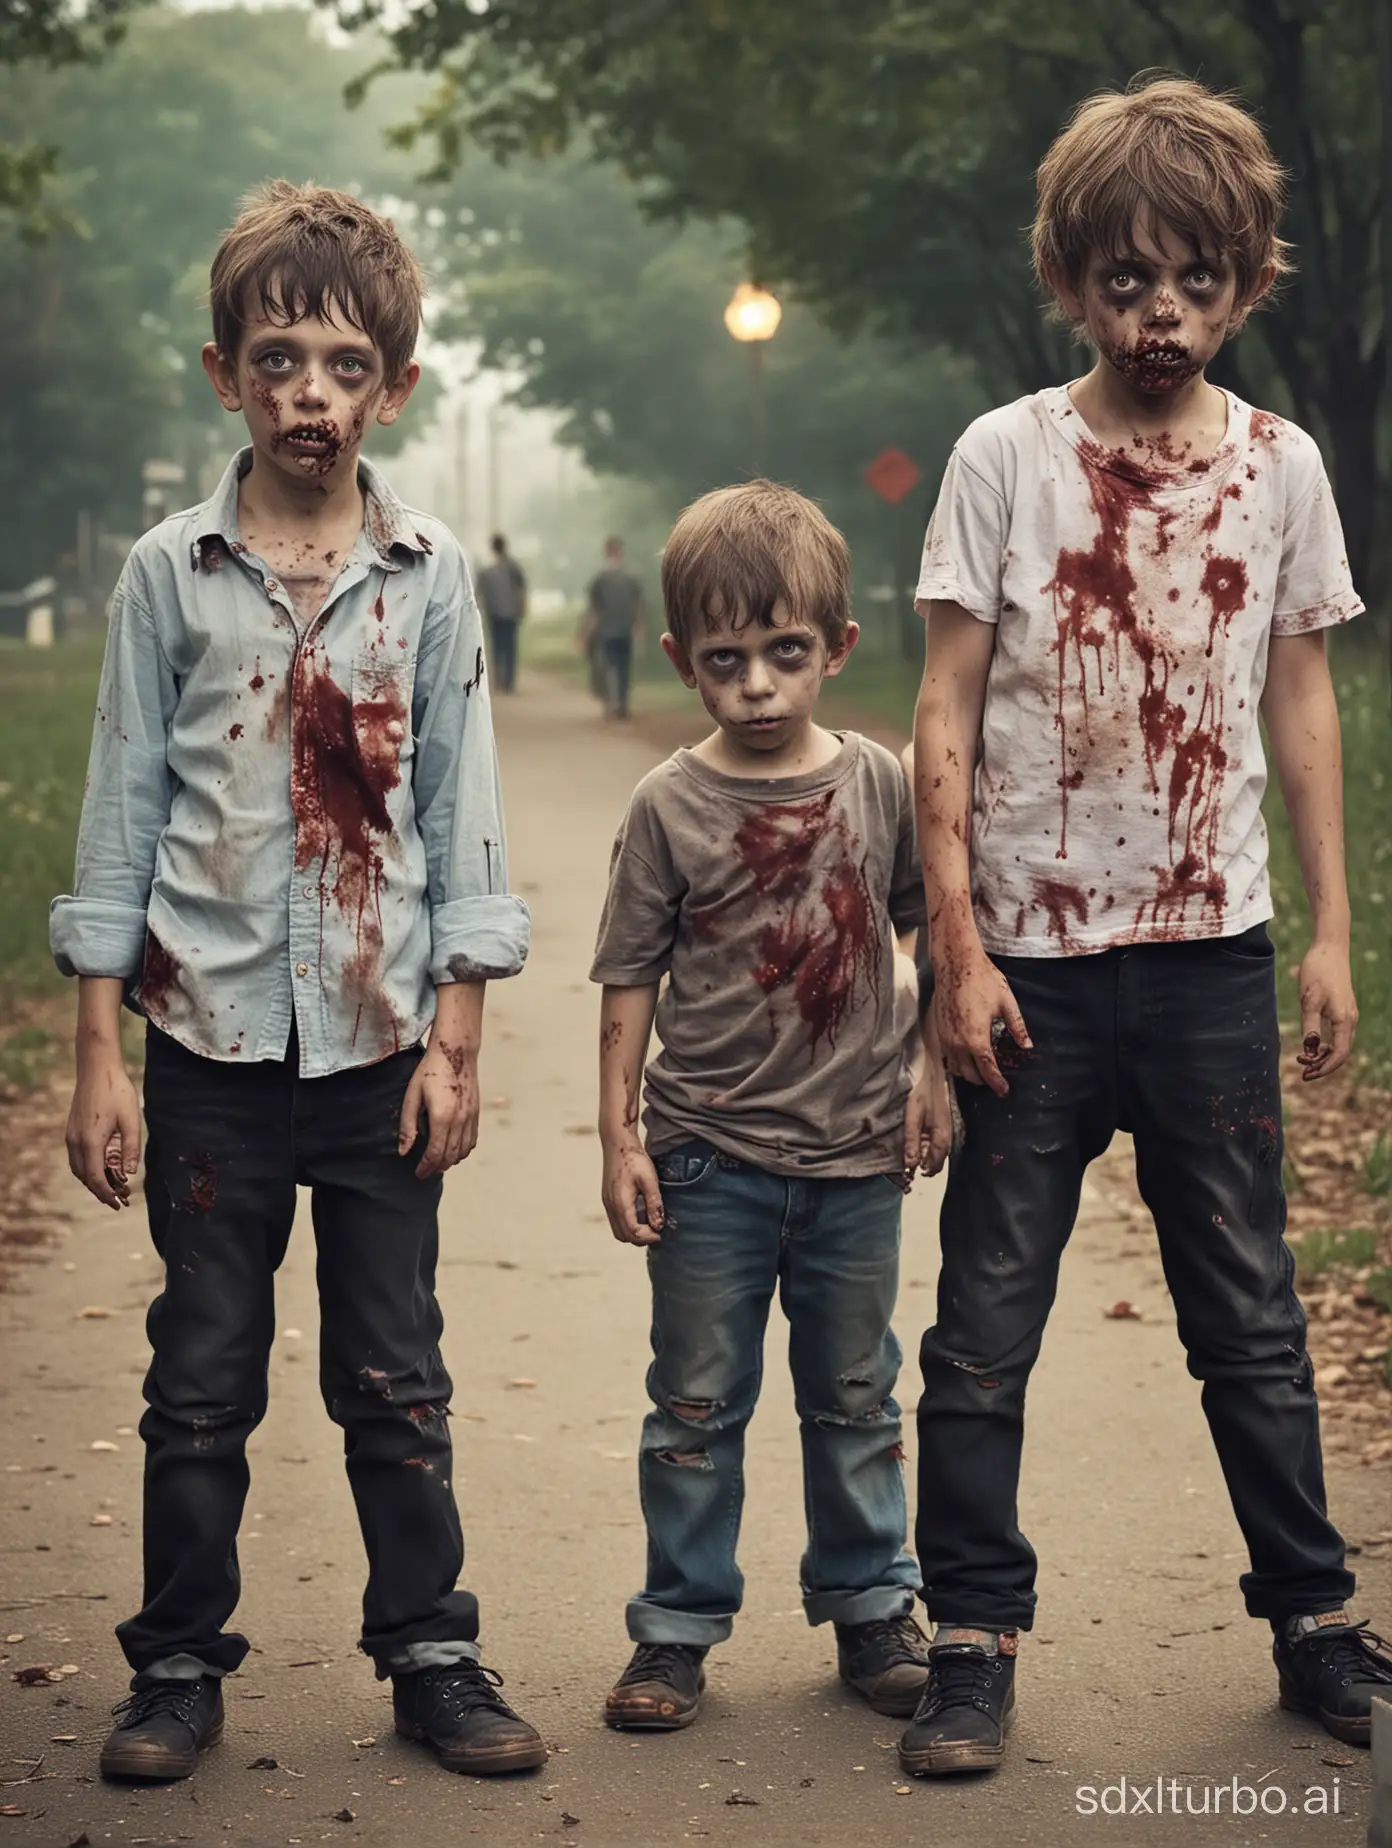 Playful-Little-Boys-with-Zombie-Costume